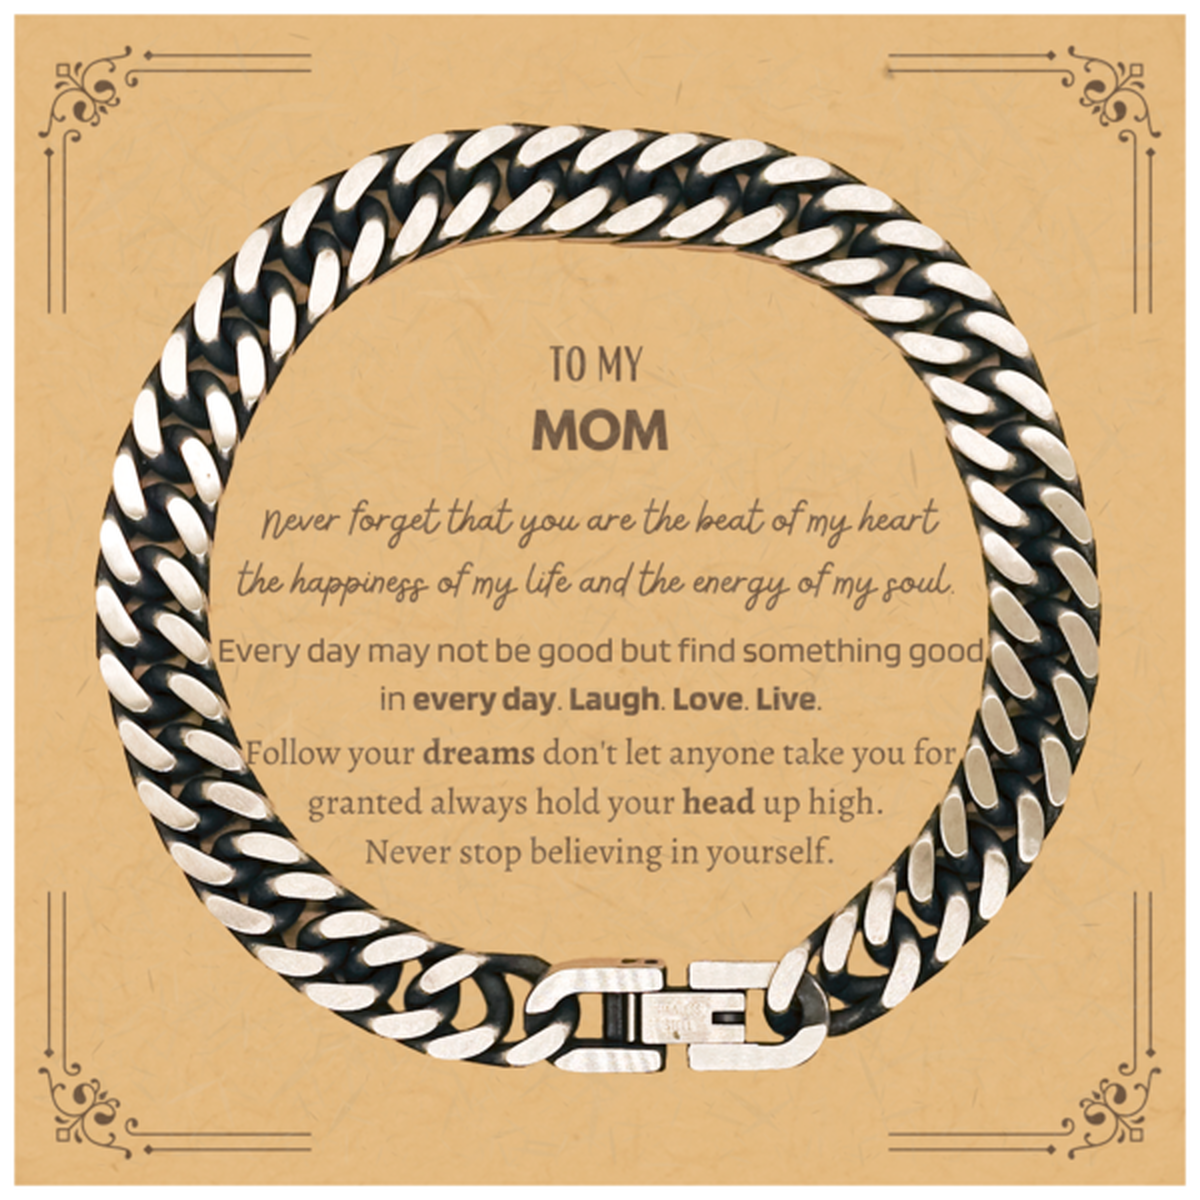 To My Mom Message Card Gifts, Christmas Mom Cuban Link Chain Bracelet Present, Birthday Unique Motivational For Mom, To My Mom Never forget that you are the beat of my heart the happiness of my life and the energy of my soul